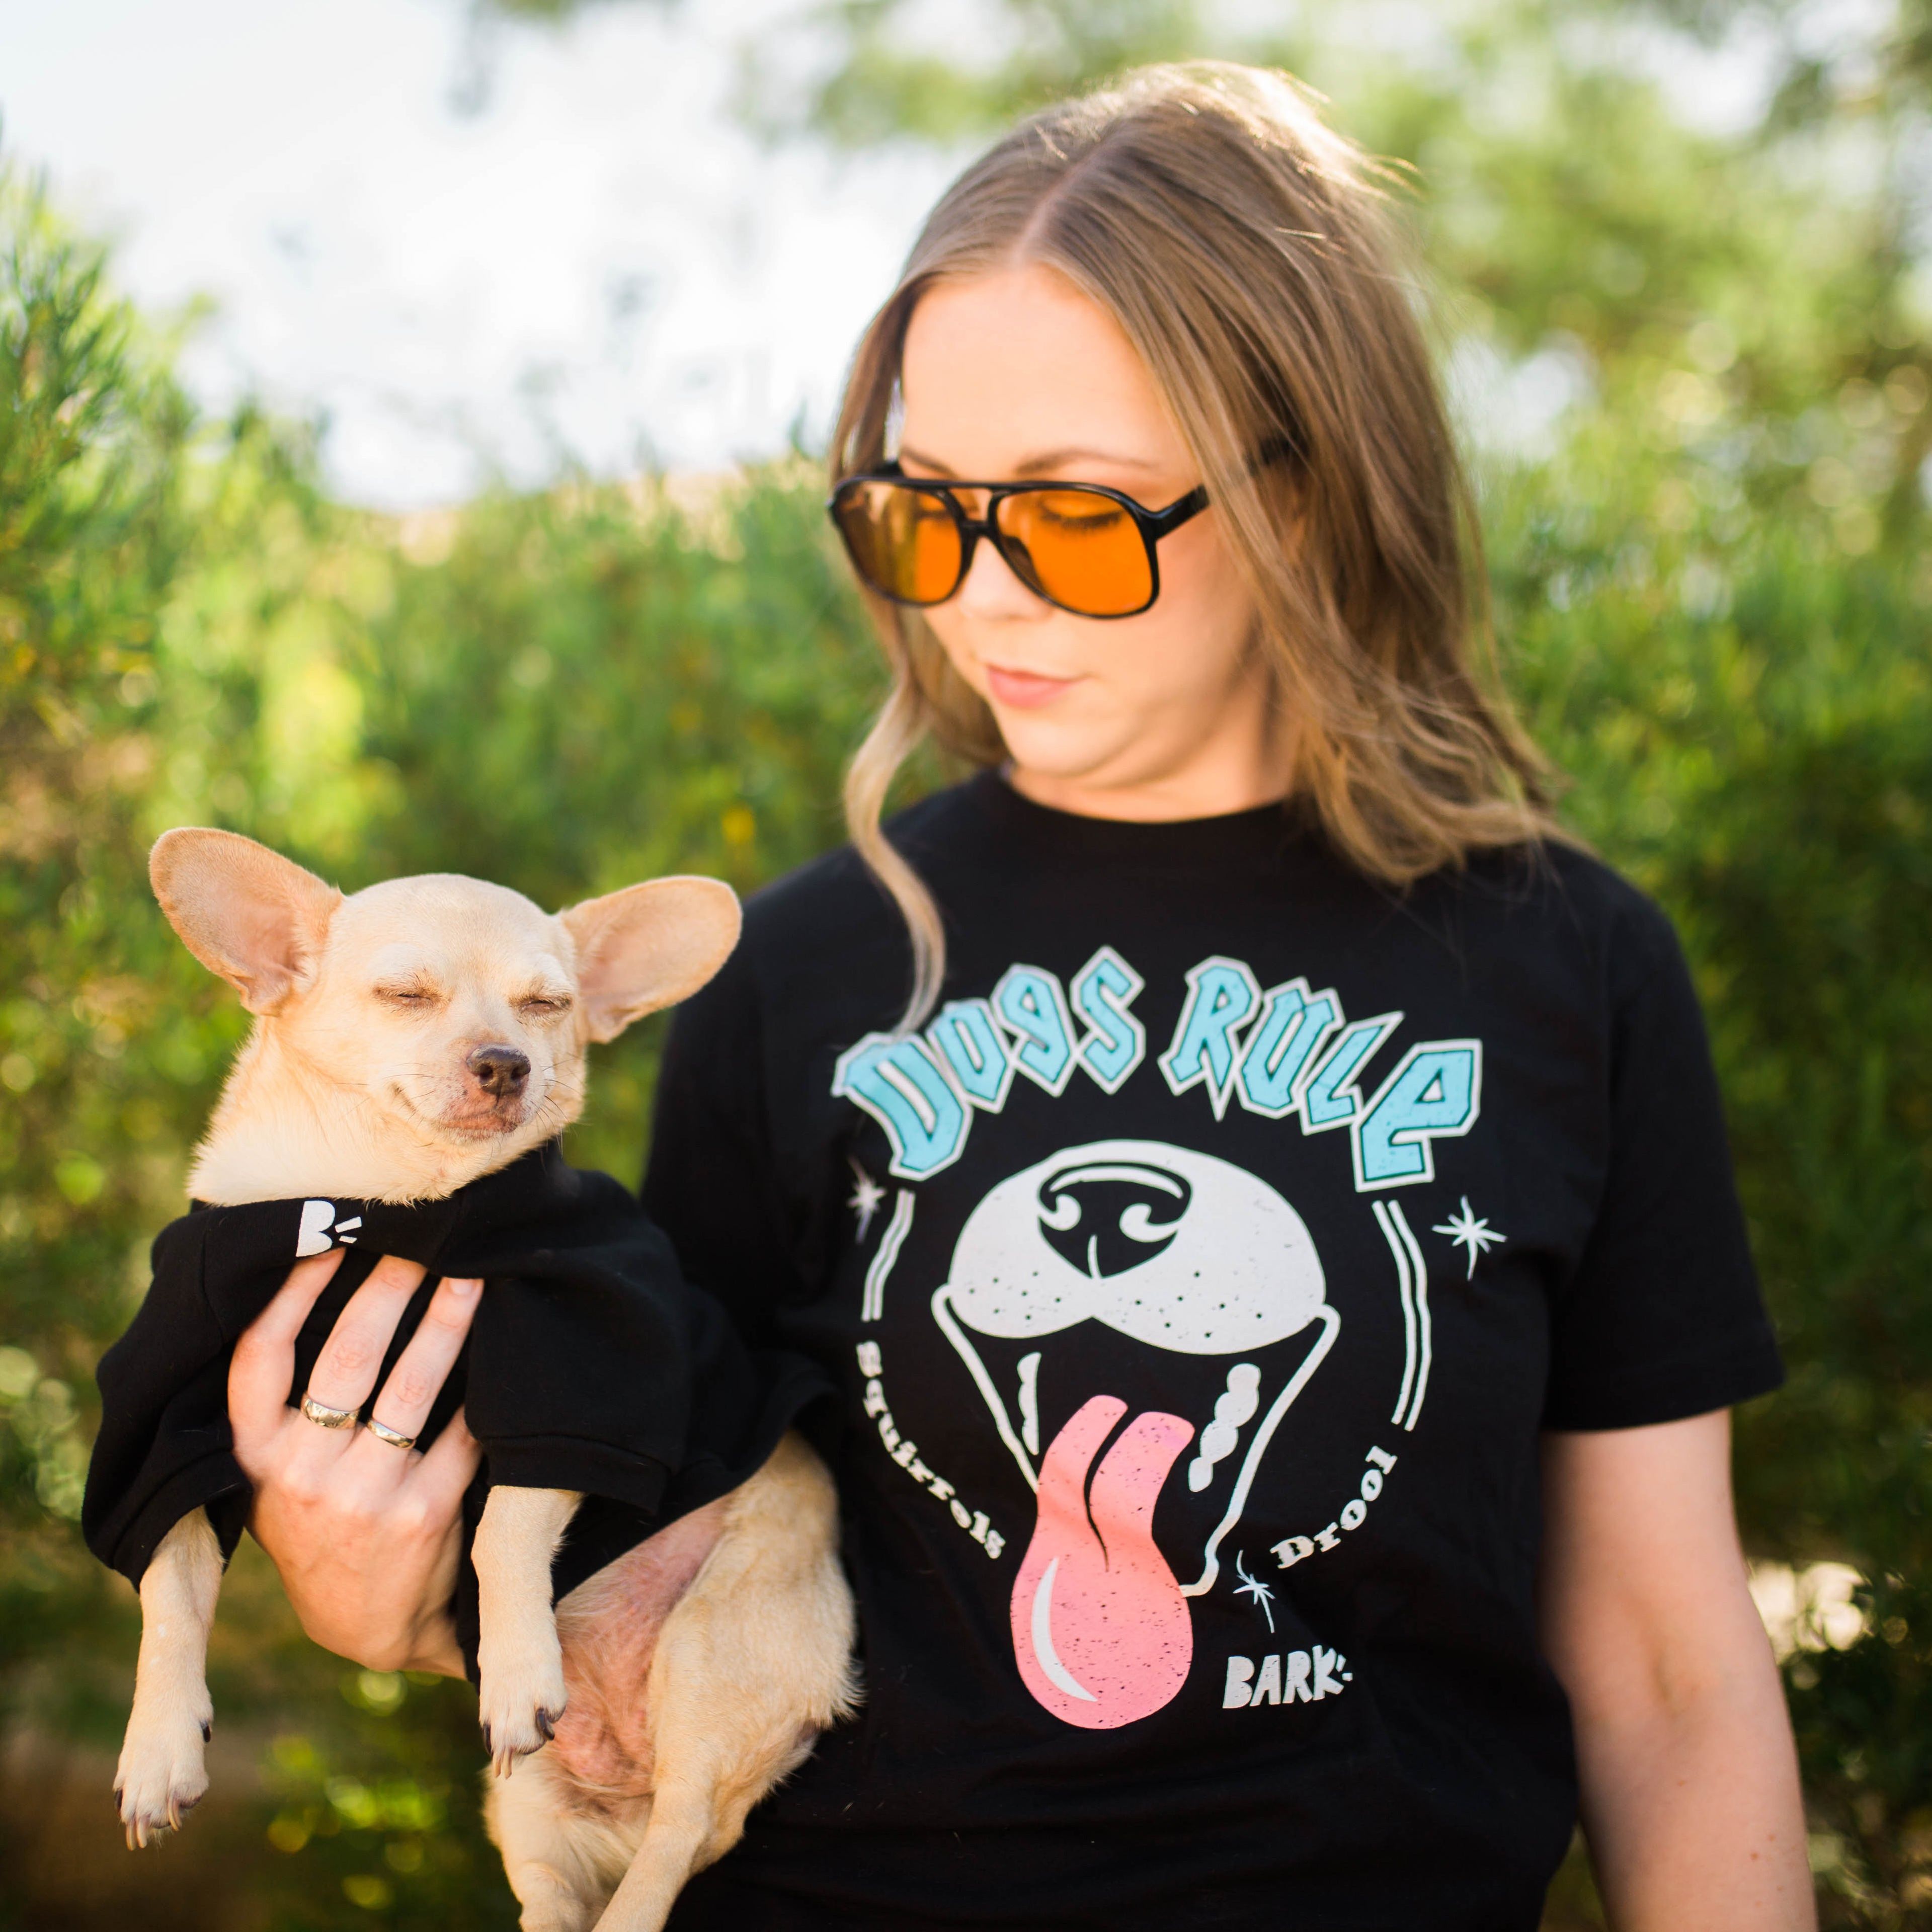 DOGS RULE Shirt for Humans